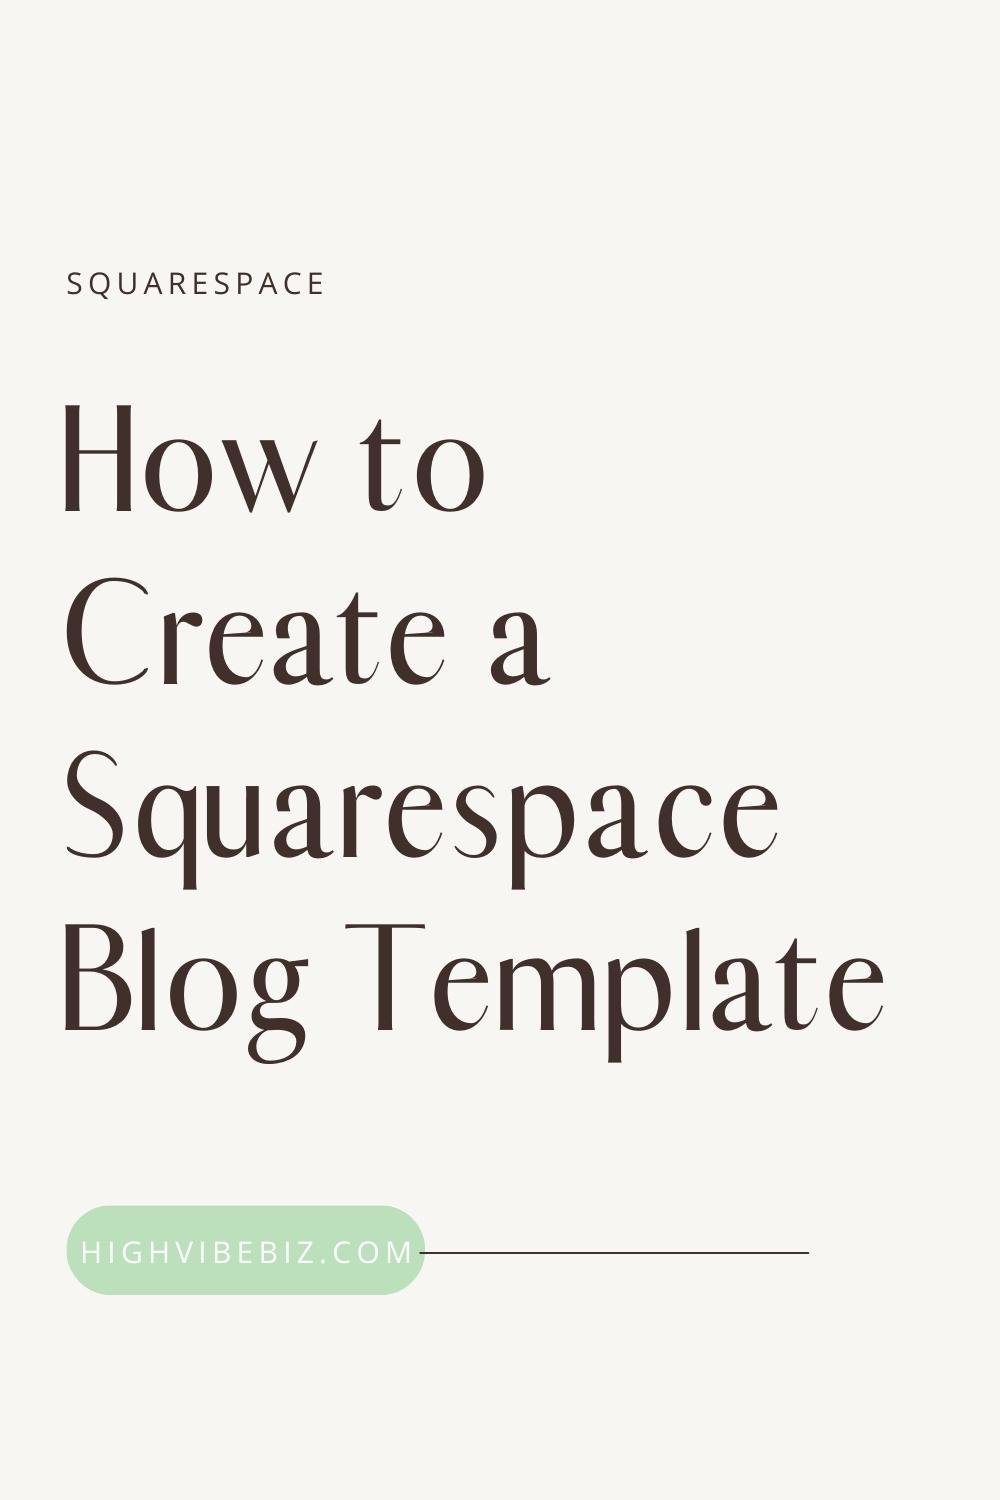 How to Create a Squarespace Blog Template